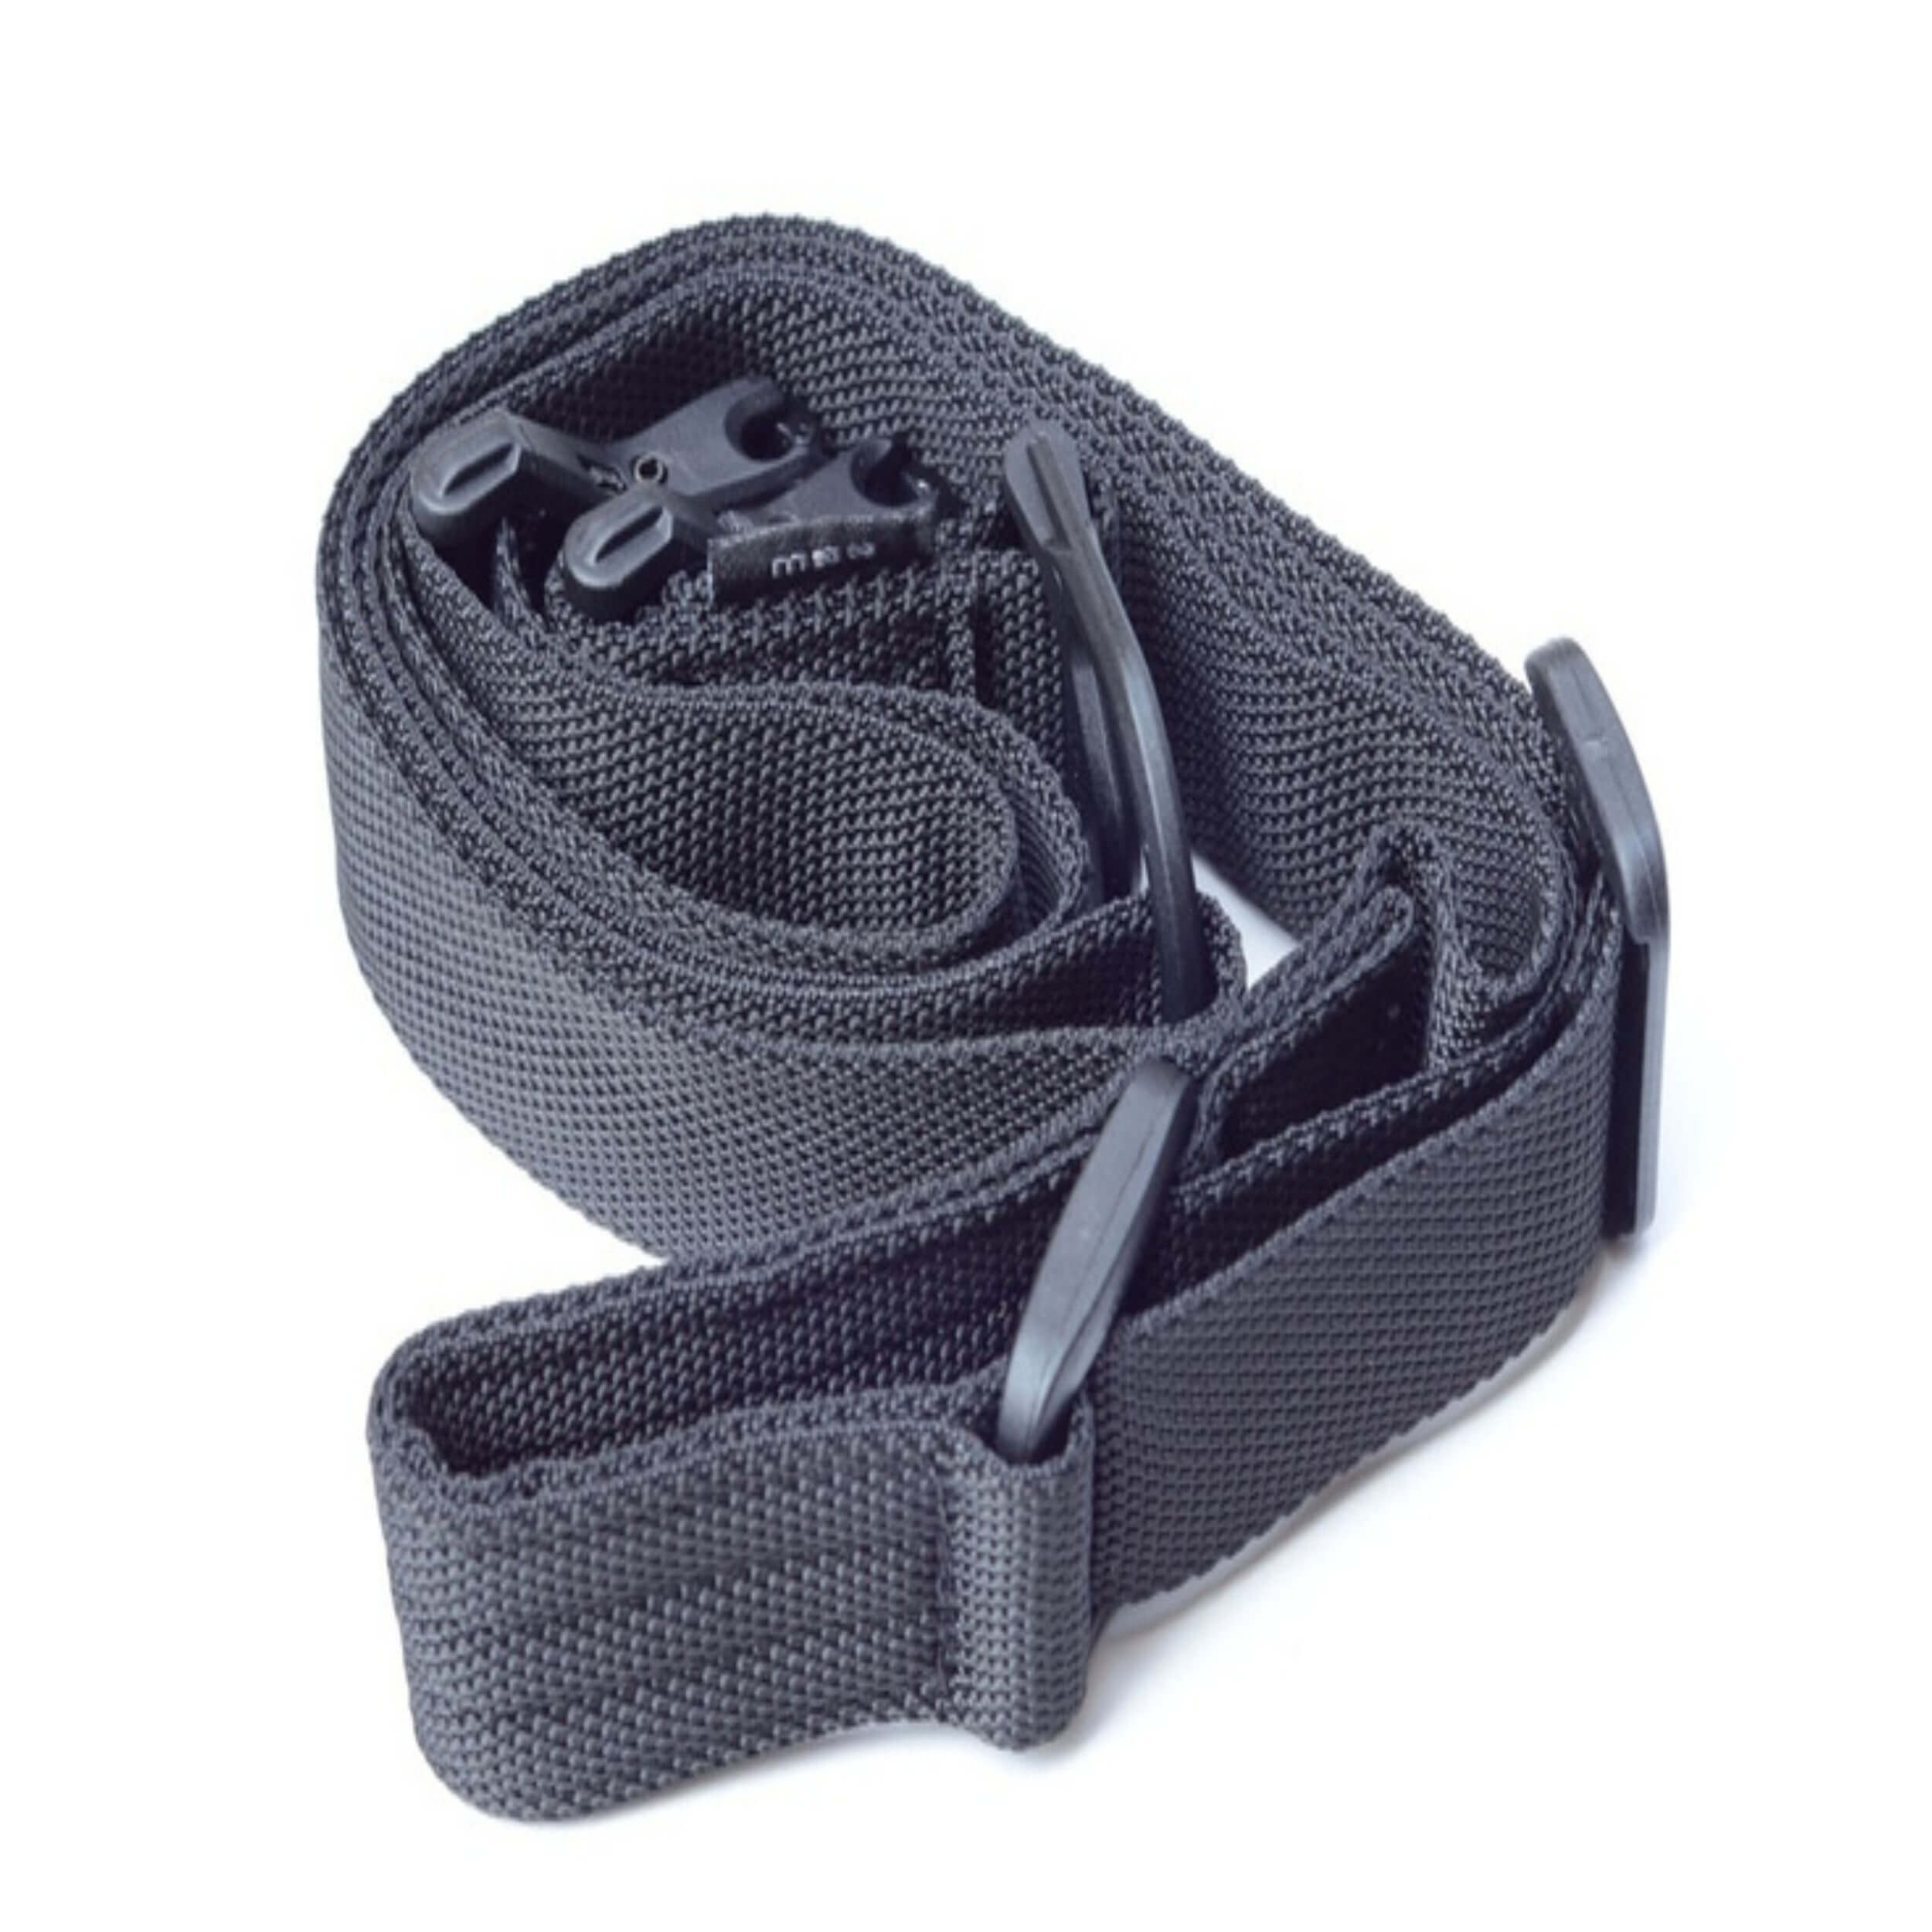 2 Point Tactical Rifle Sling